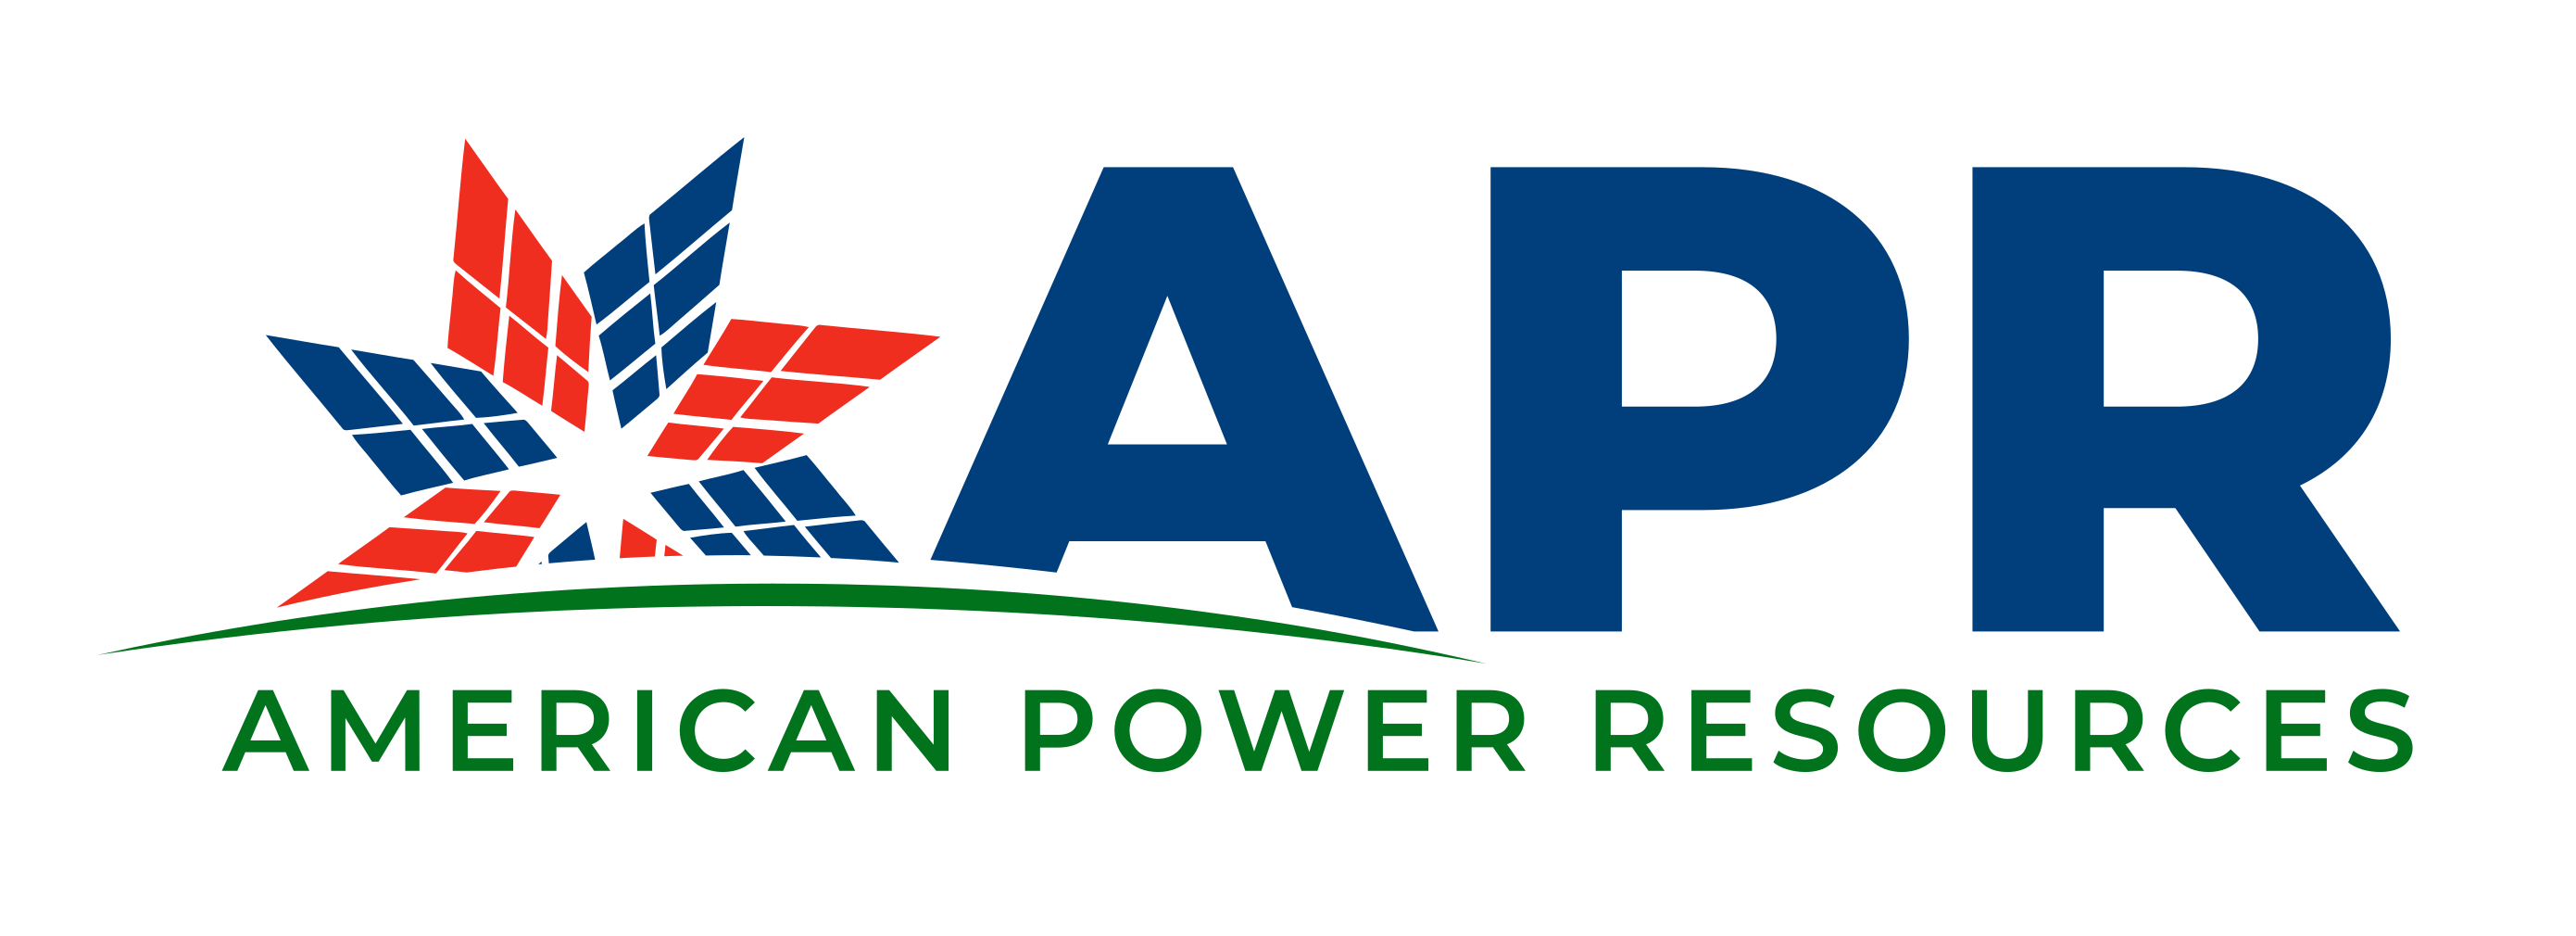 American Power Resources